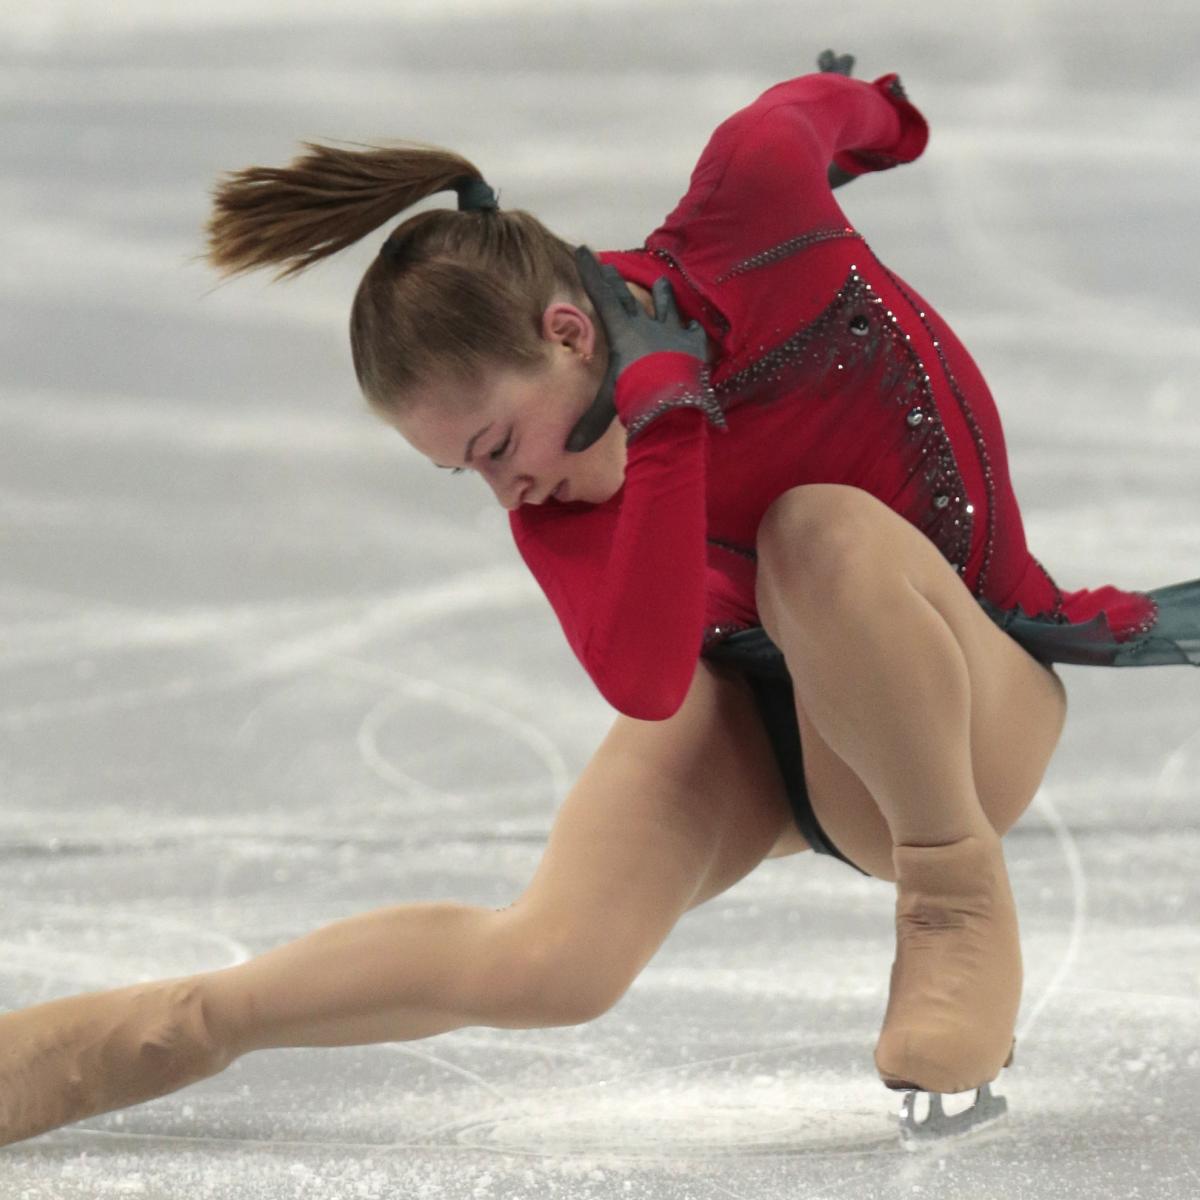 Women's Figure Skating Olympics 2014 Schedule, Medal Predictions for